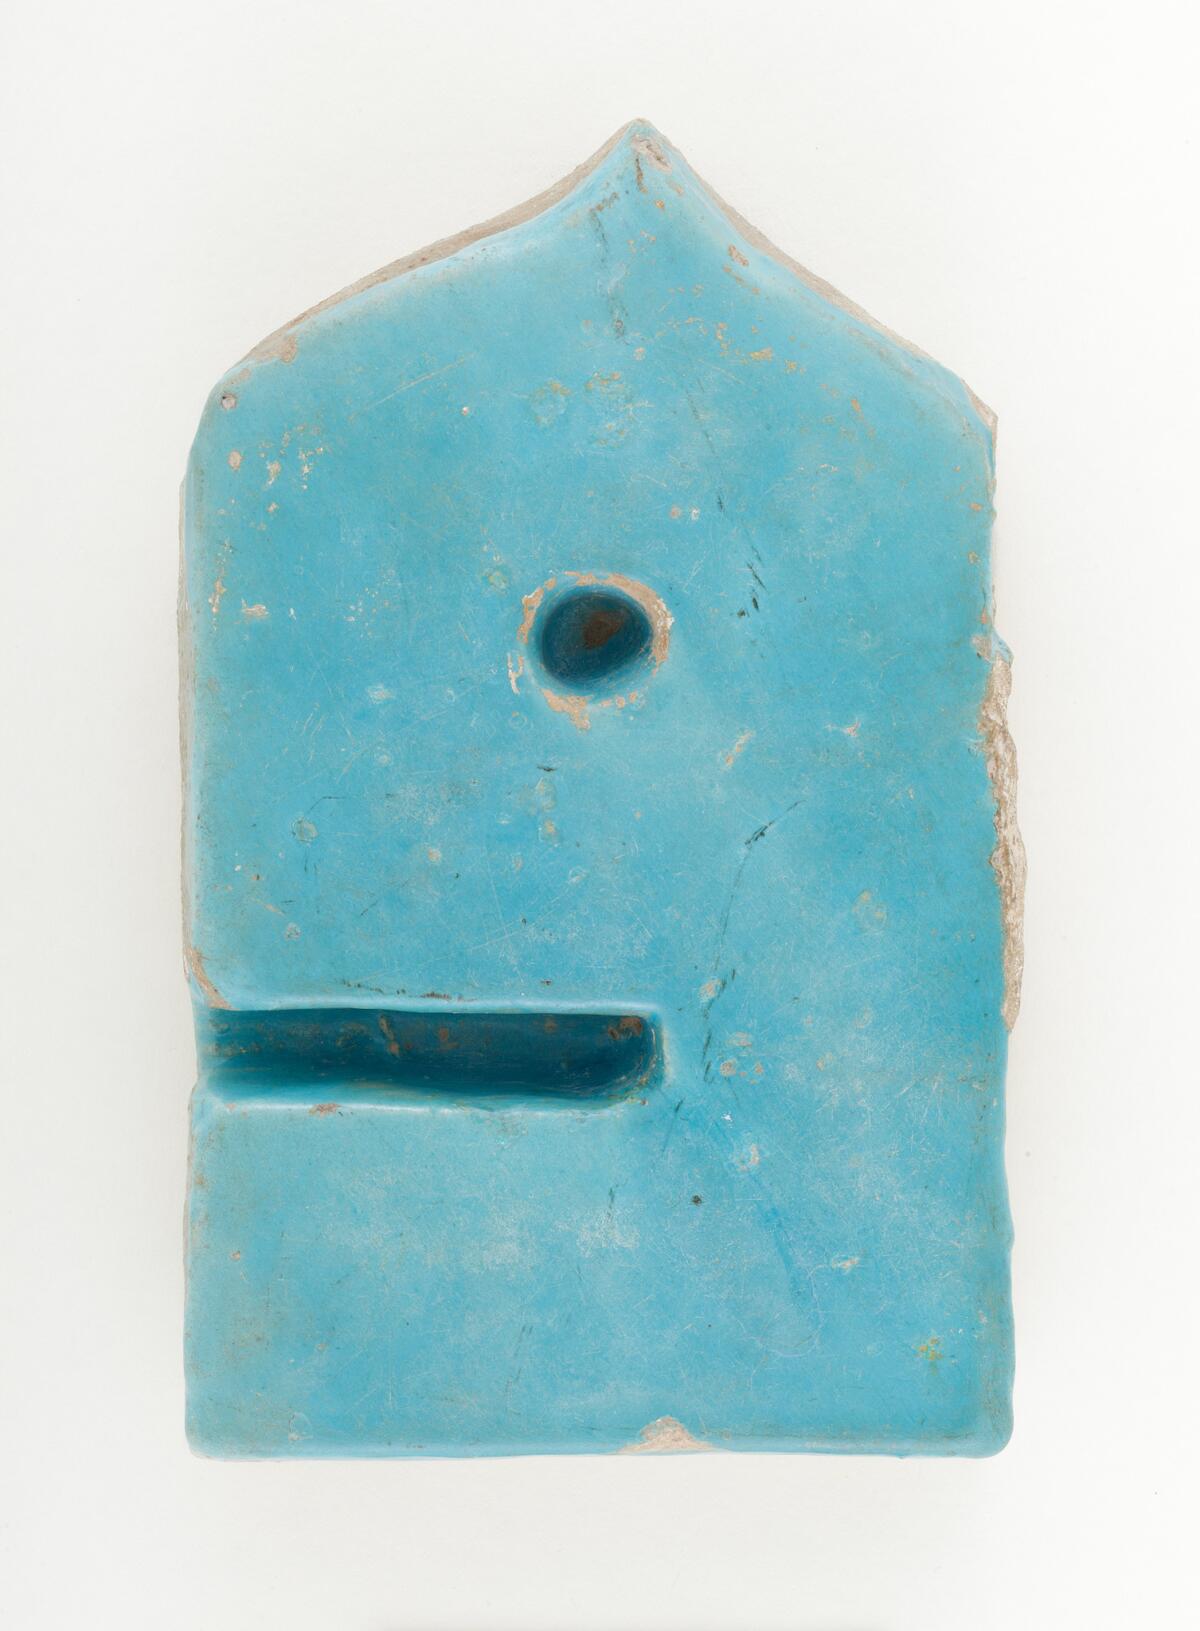 A 12th century ceramic tile in the form of the Arabic letter "Waw." This piece, which feels so contemporary in its design, would have served as part of an architectural inscription on a building.